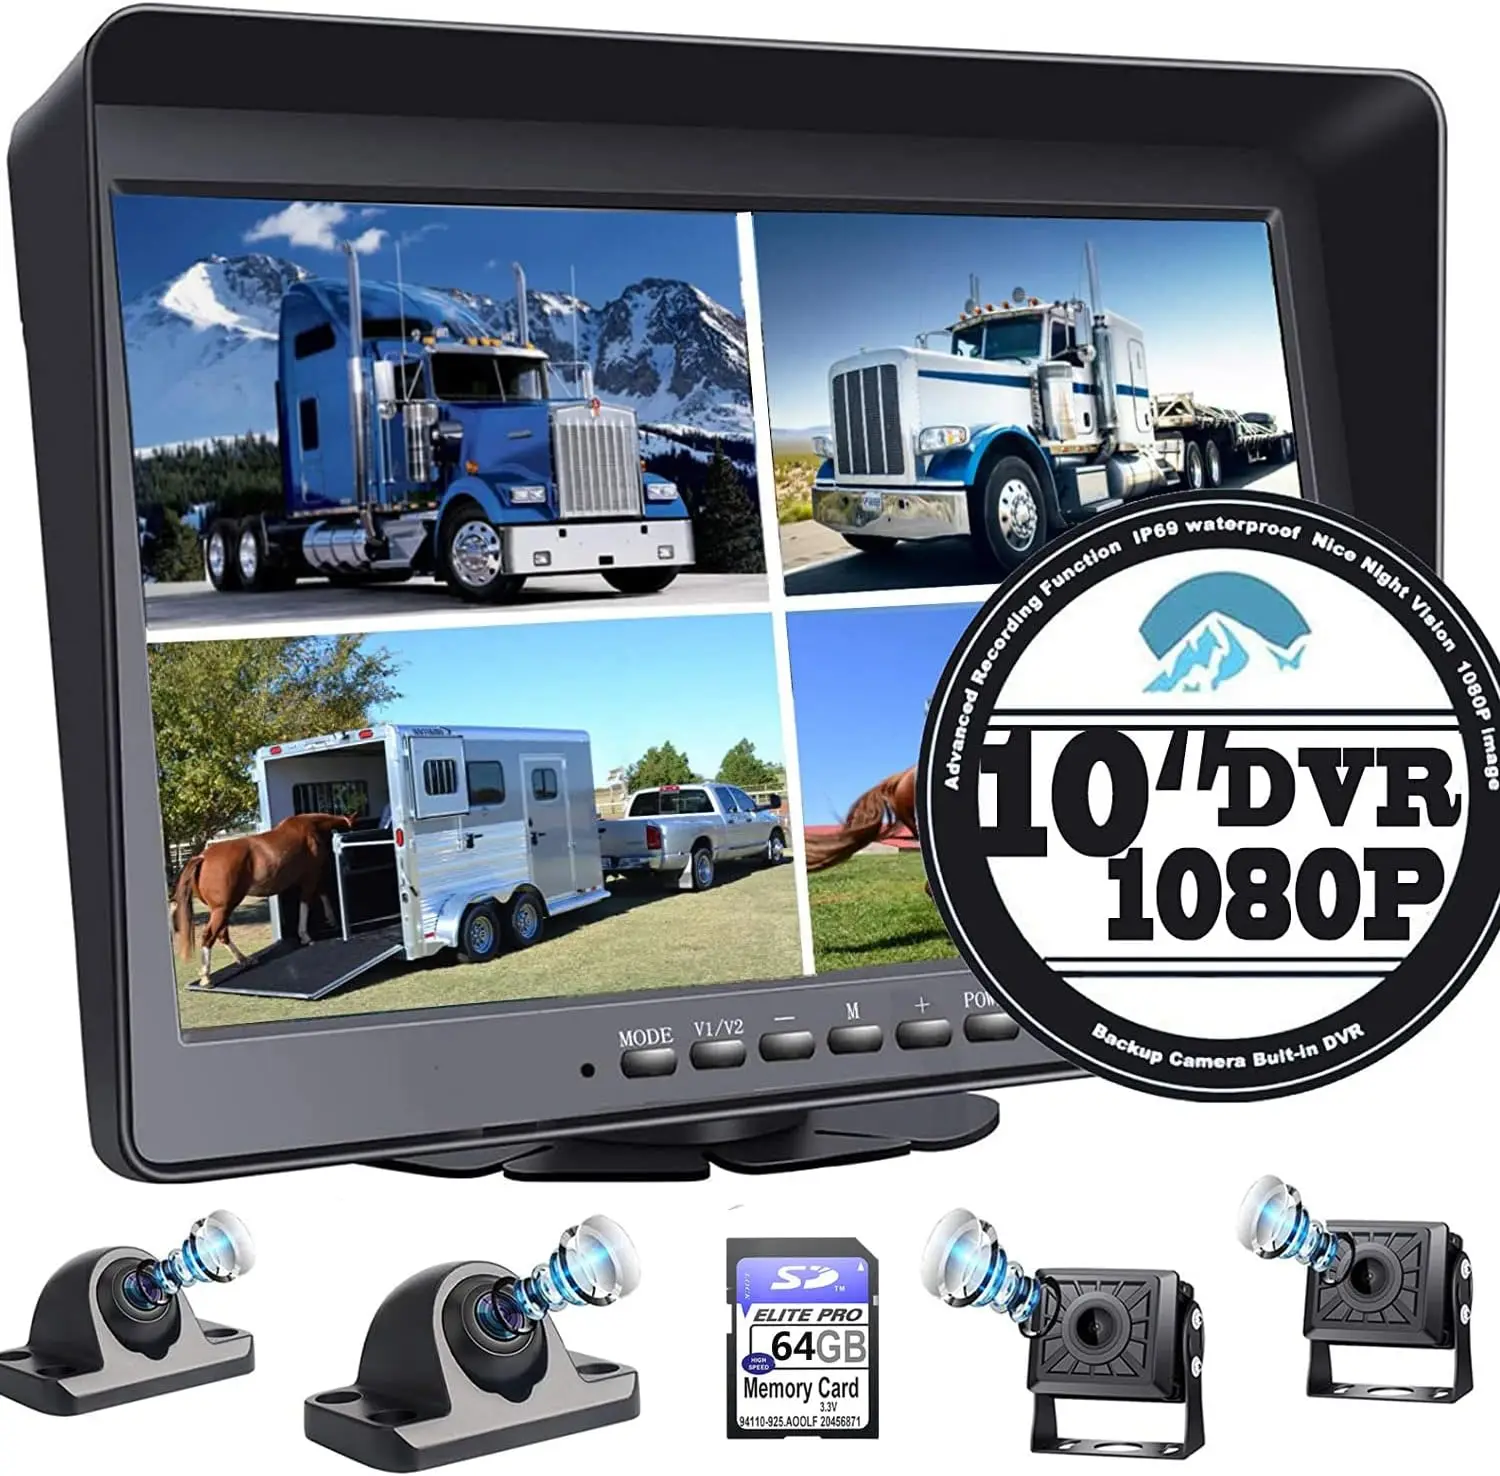 Car Backup Camera Monitor Built-in DVR for RV Truck Trailer Rear Side Front Reversing View Wired System FHD Image 4 Split Screen 4ch reverse backup vehicle 2 4g rearview car monitor rear view dash board system reversing kit wireless parking hd rearview came